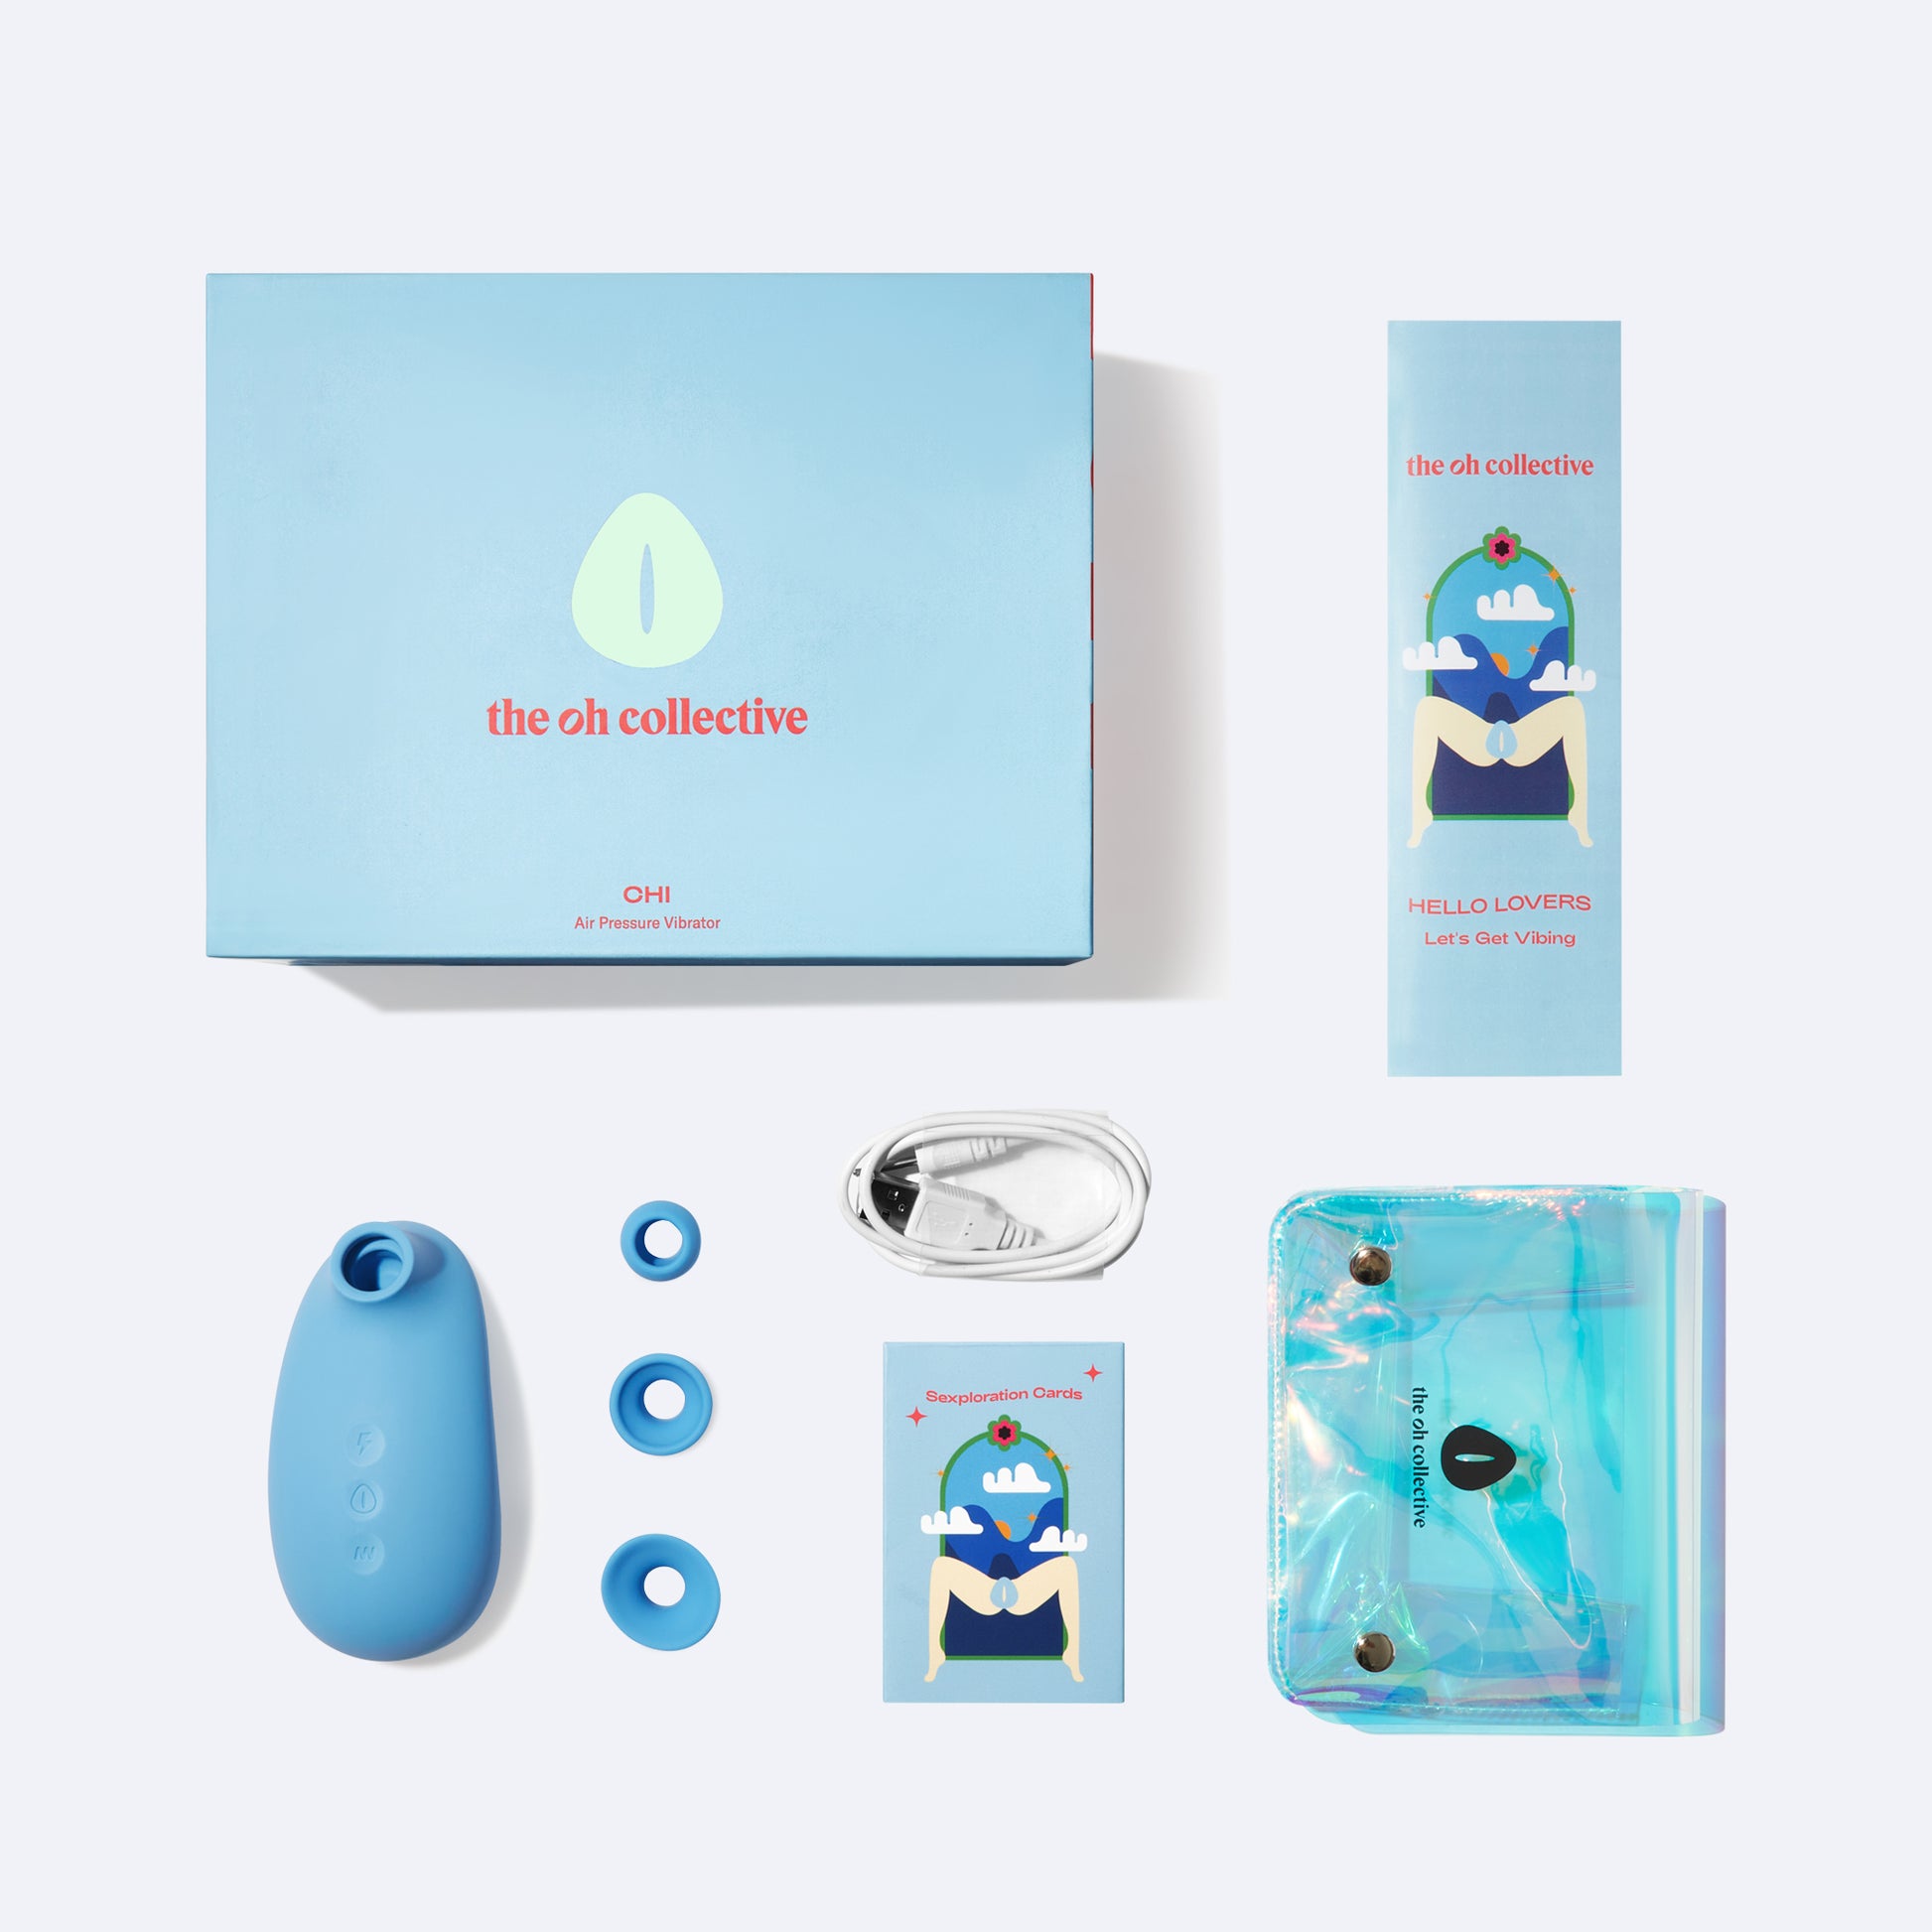 Our CHI Air Suction Vibrator comes with 3 interchangeable suction heads, a deck of Sexploration Cards, one USB charger, a iridescent storage pouch, and an international manual.